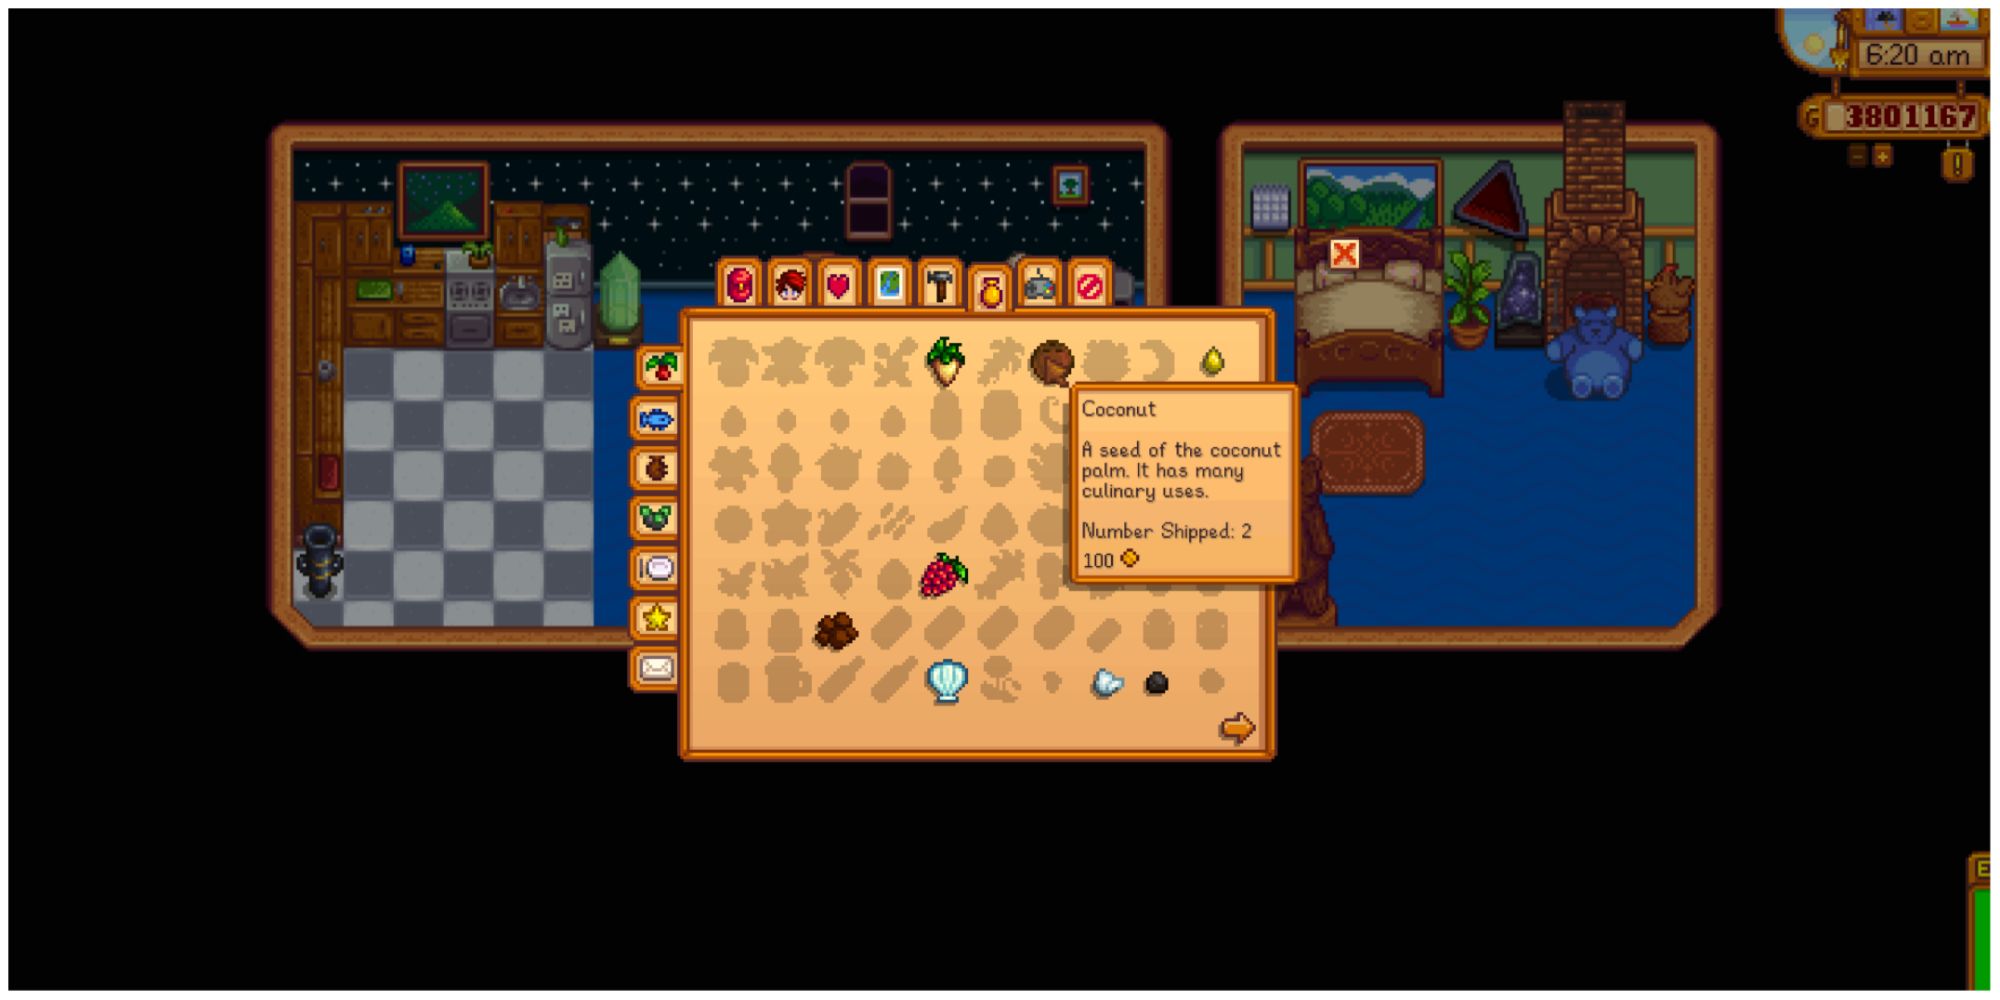 Stardew Valley collections tab with coconut selected